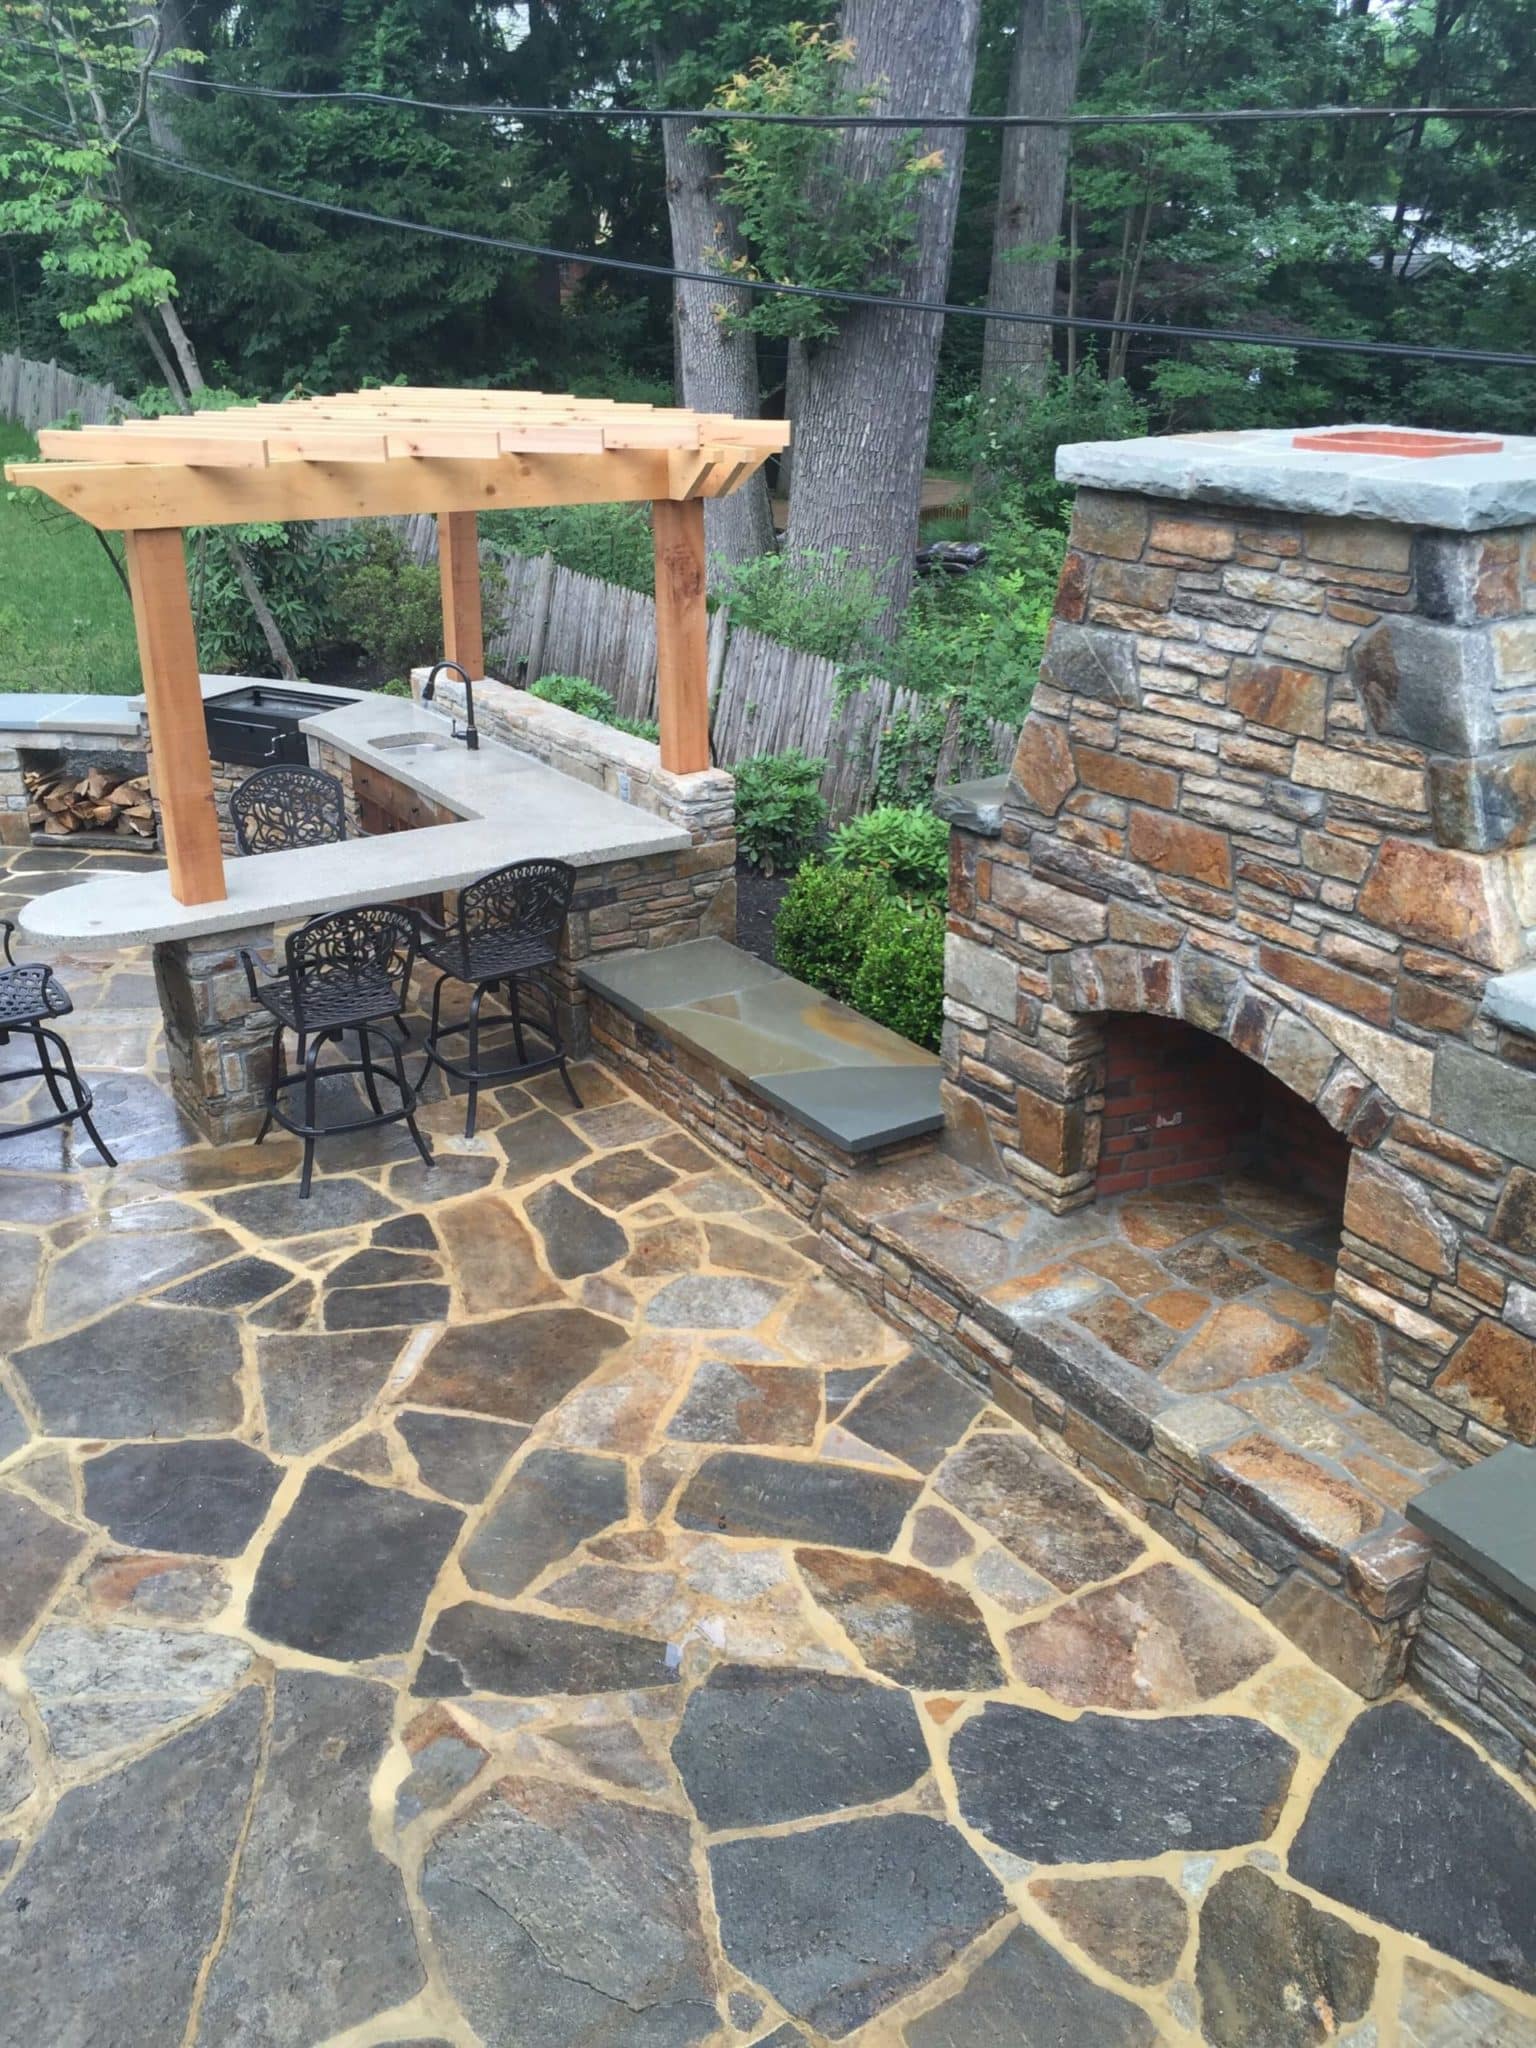 397 Outdoor Fireplace in Baltimore Wall Stone with PA Flagstone Caps